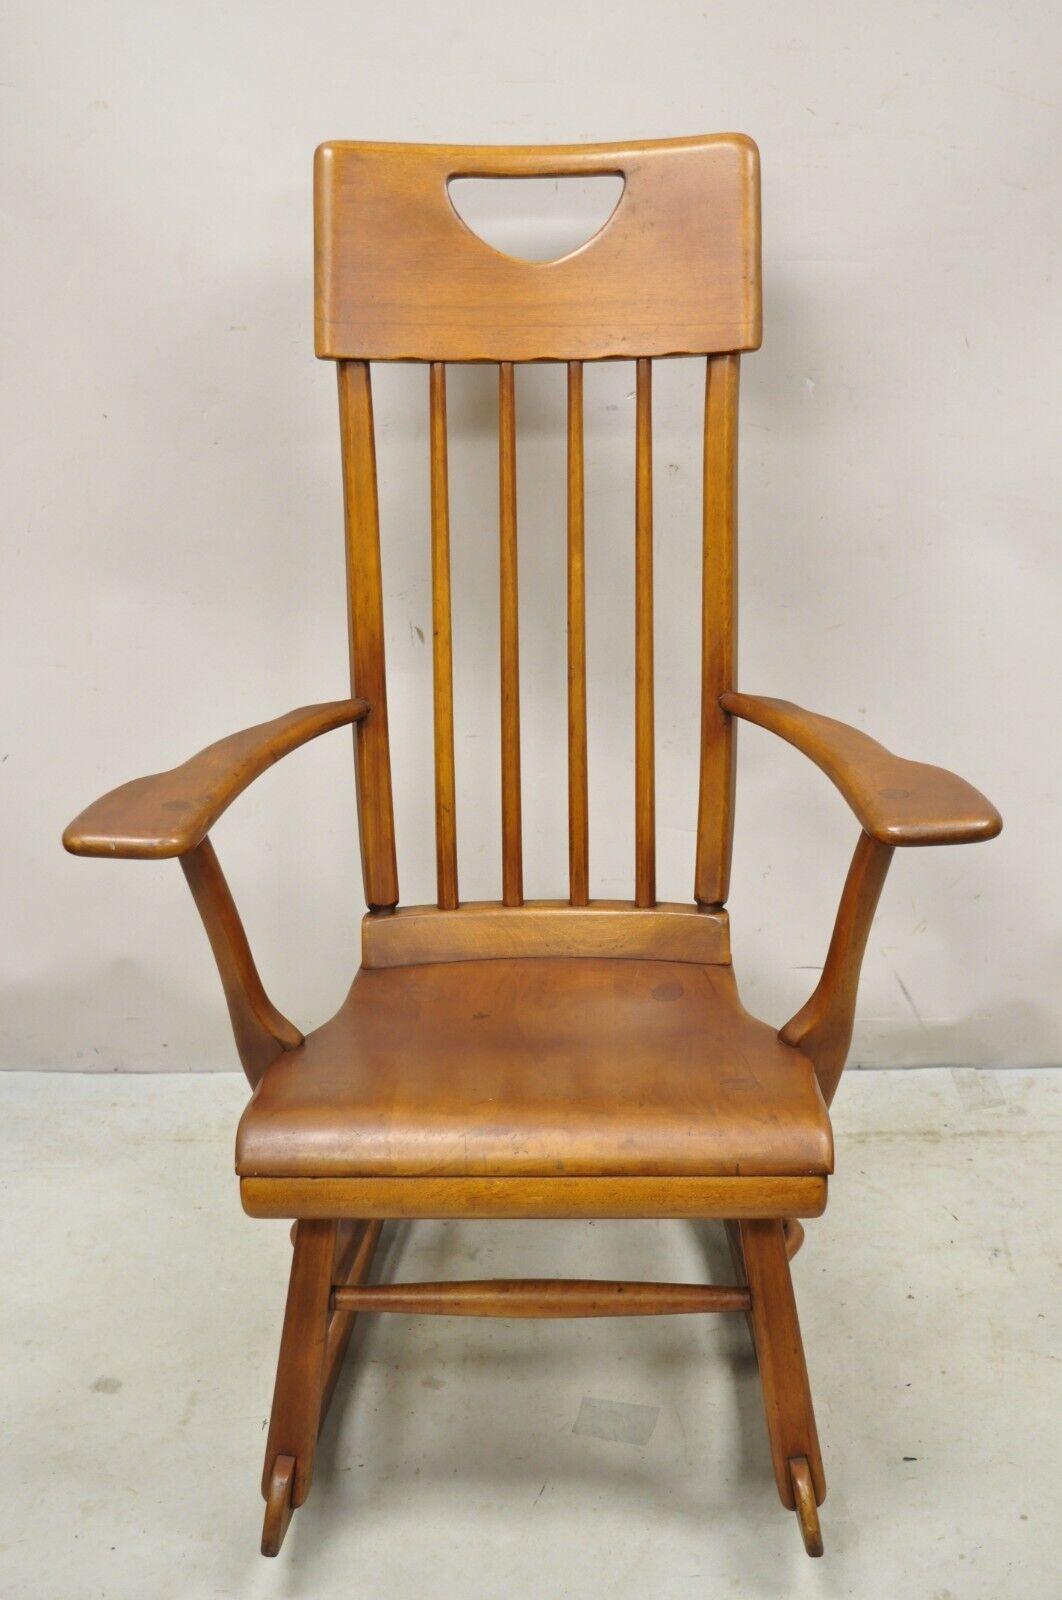 Vintage Sikes Co Maple Wood American Colonial Style Rocker Rocking Chair (A). Item features solid wood construction, beautiful wood grain, very nice vintage item, quality American craftsmanship, great style and form. Circa Mid 20th Century.